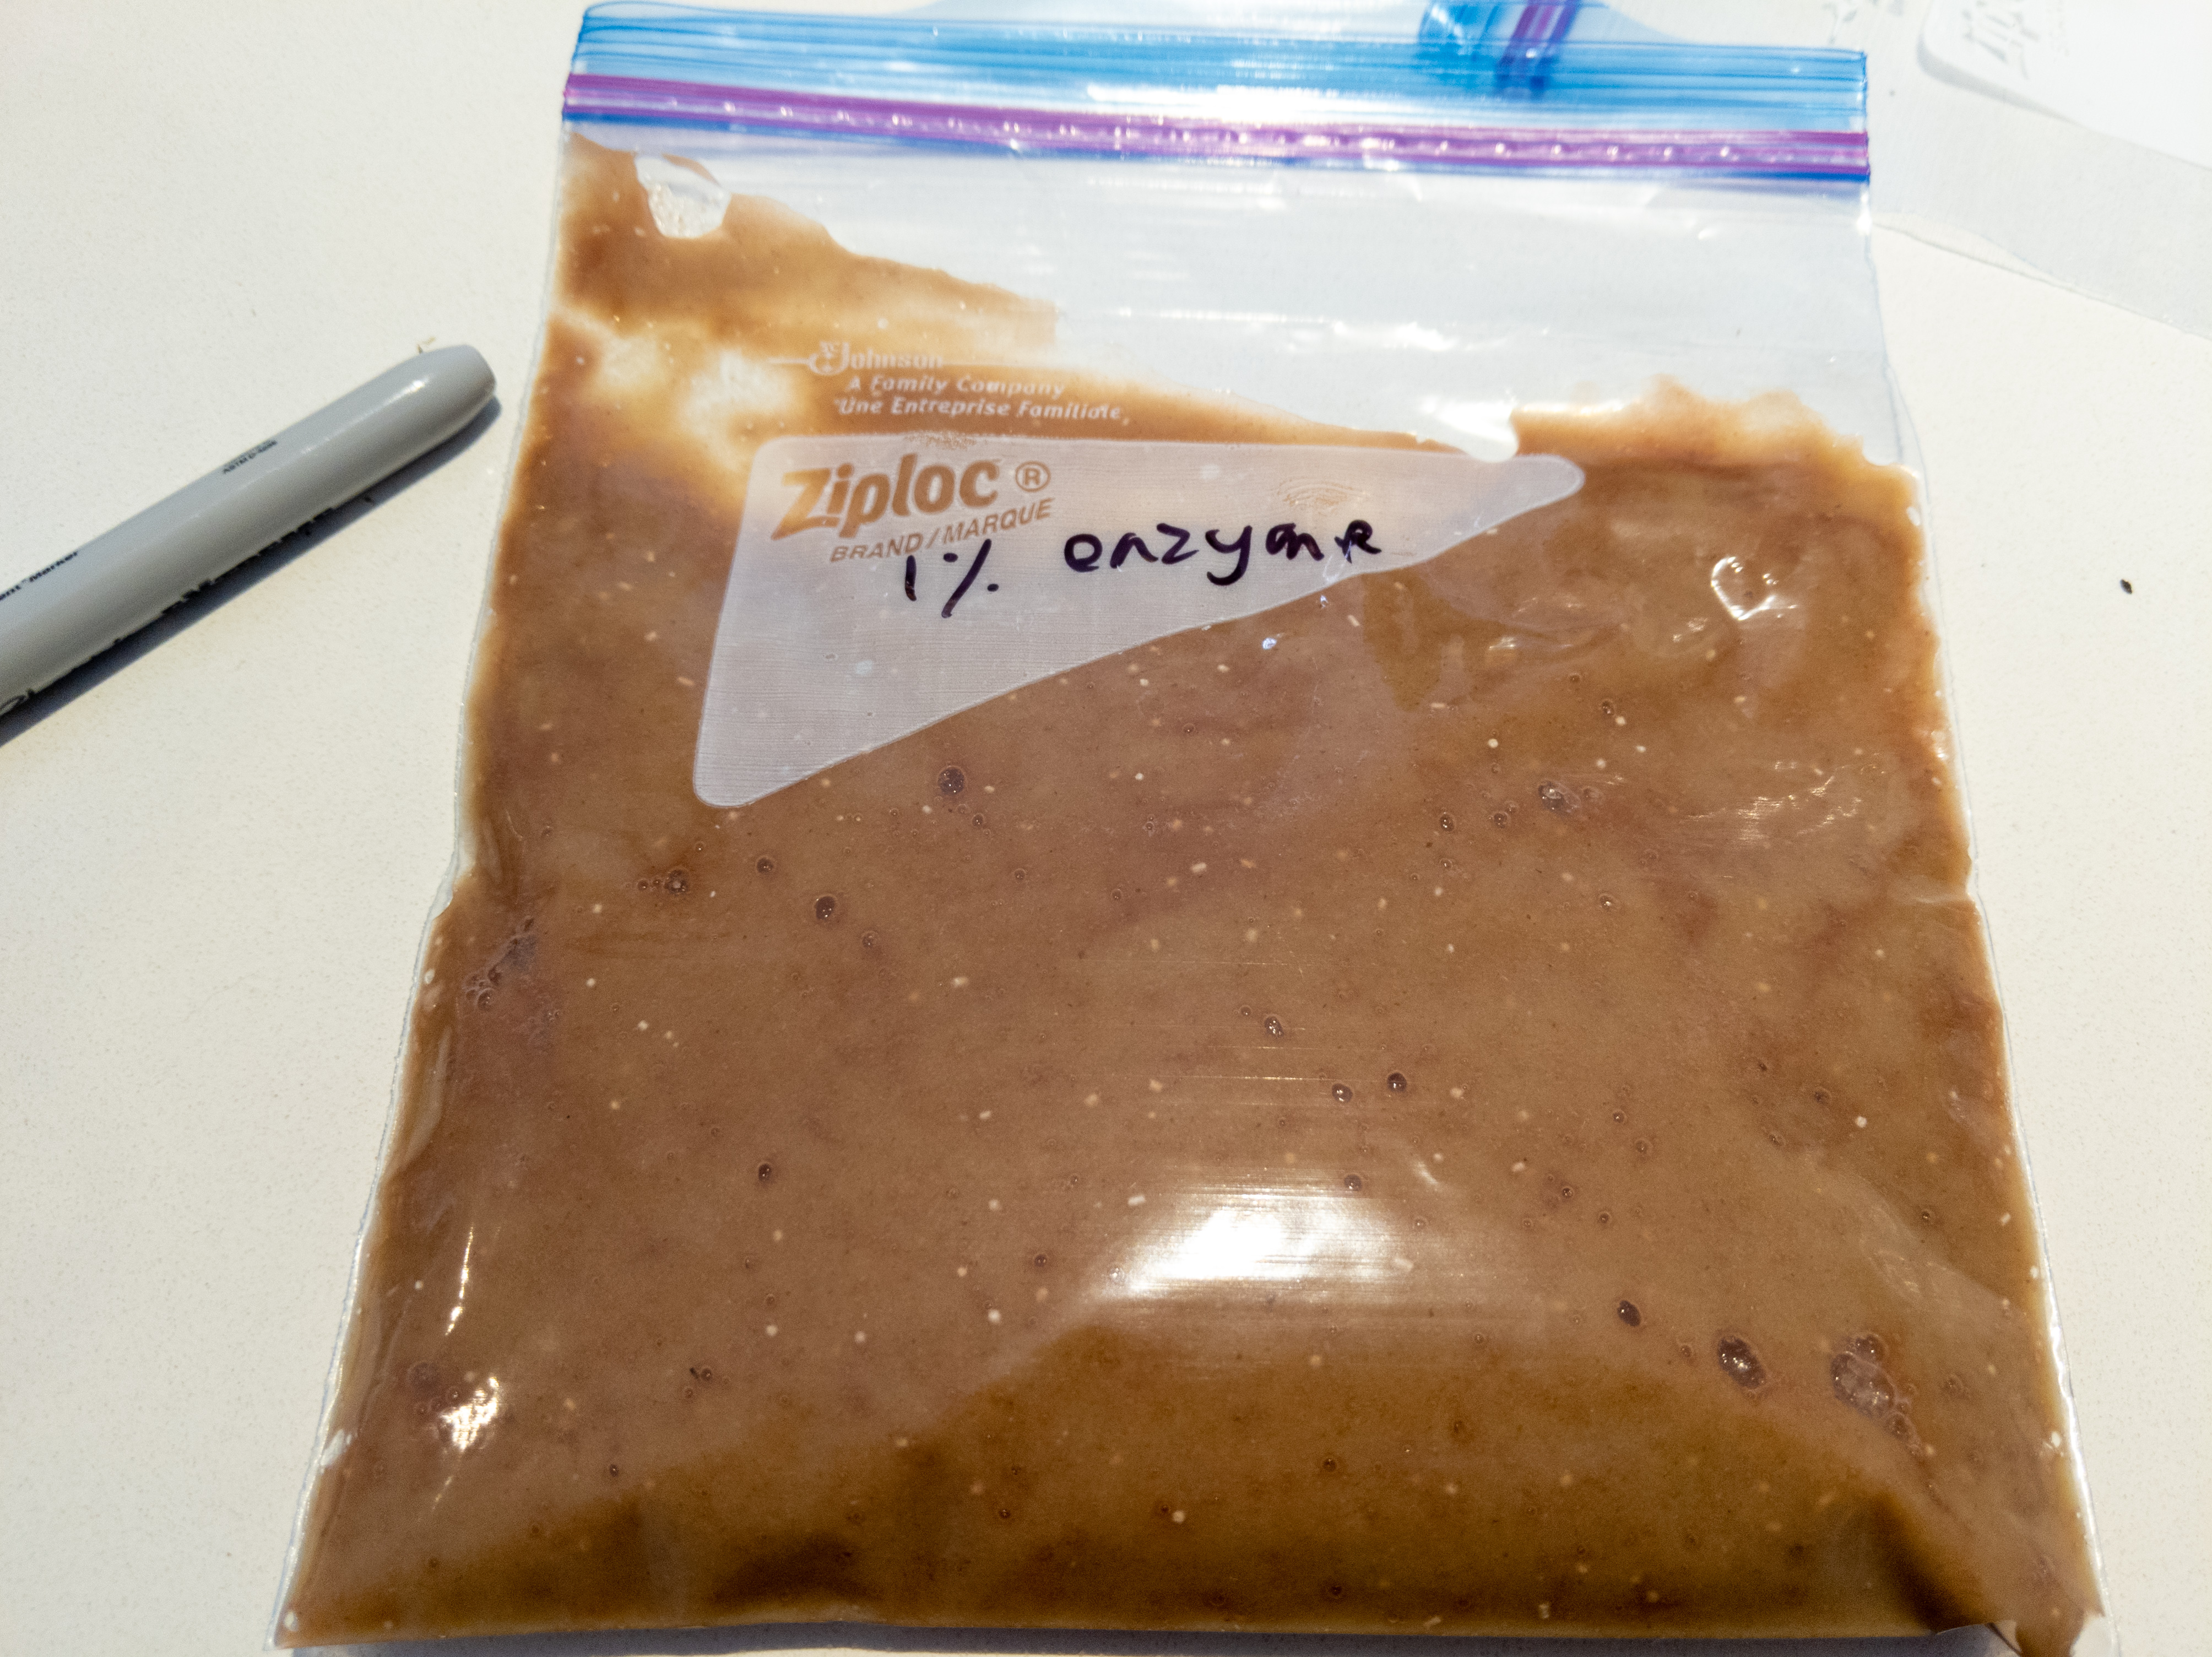 A picture of a ziplock bag filled with a brown puree. The bag is labelled '1% enzyme'